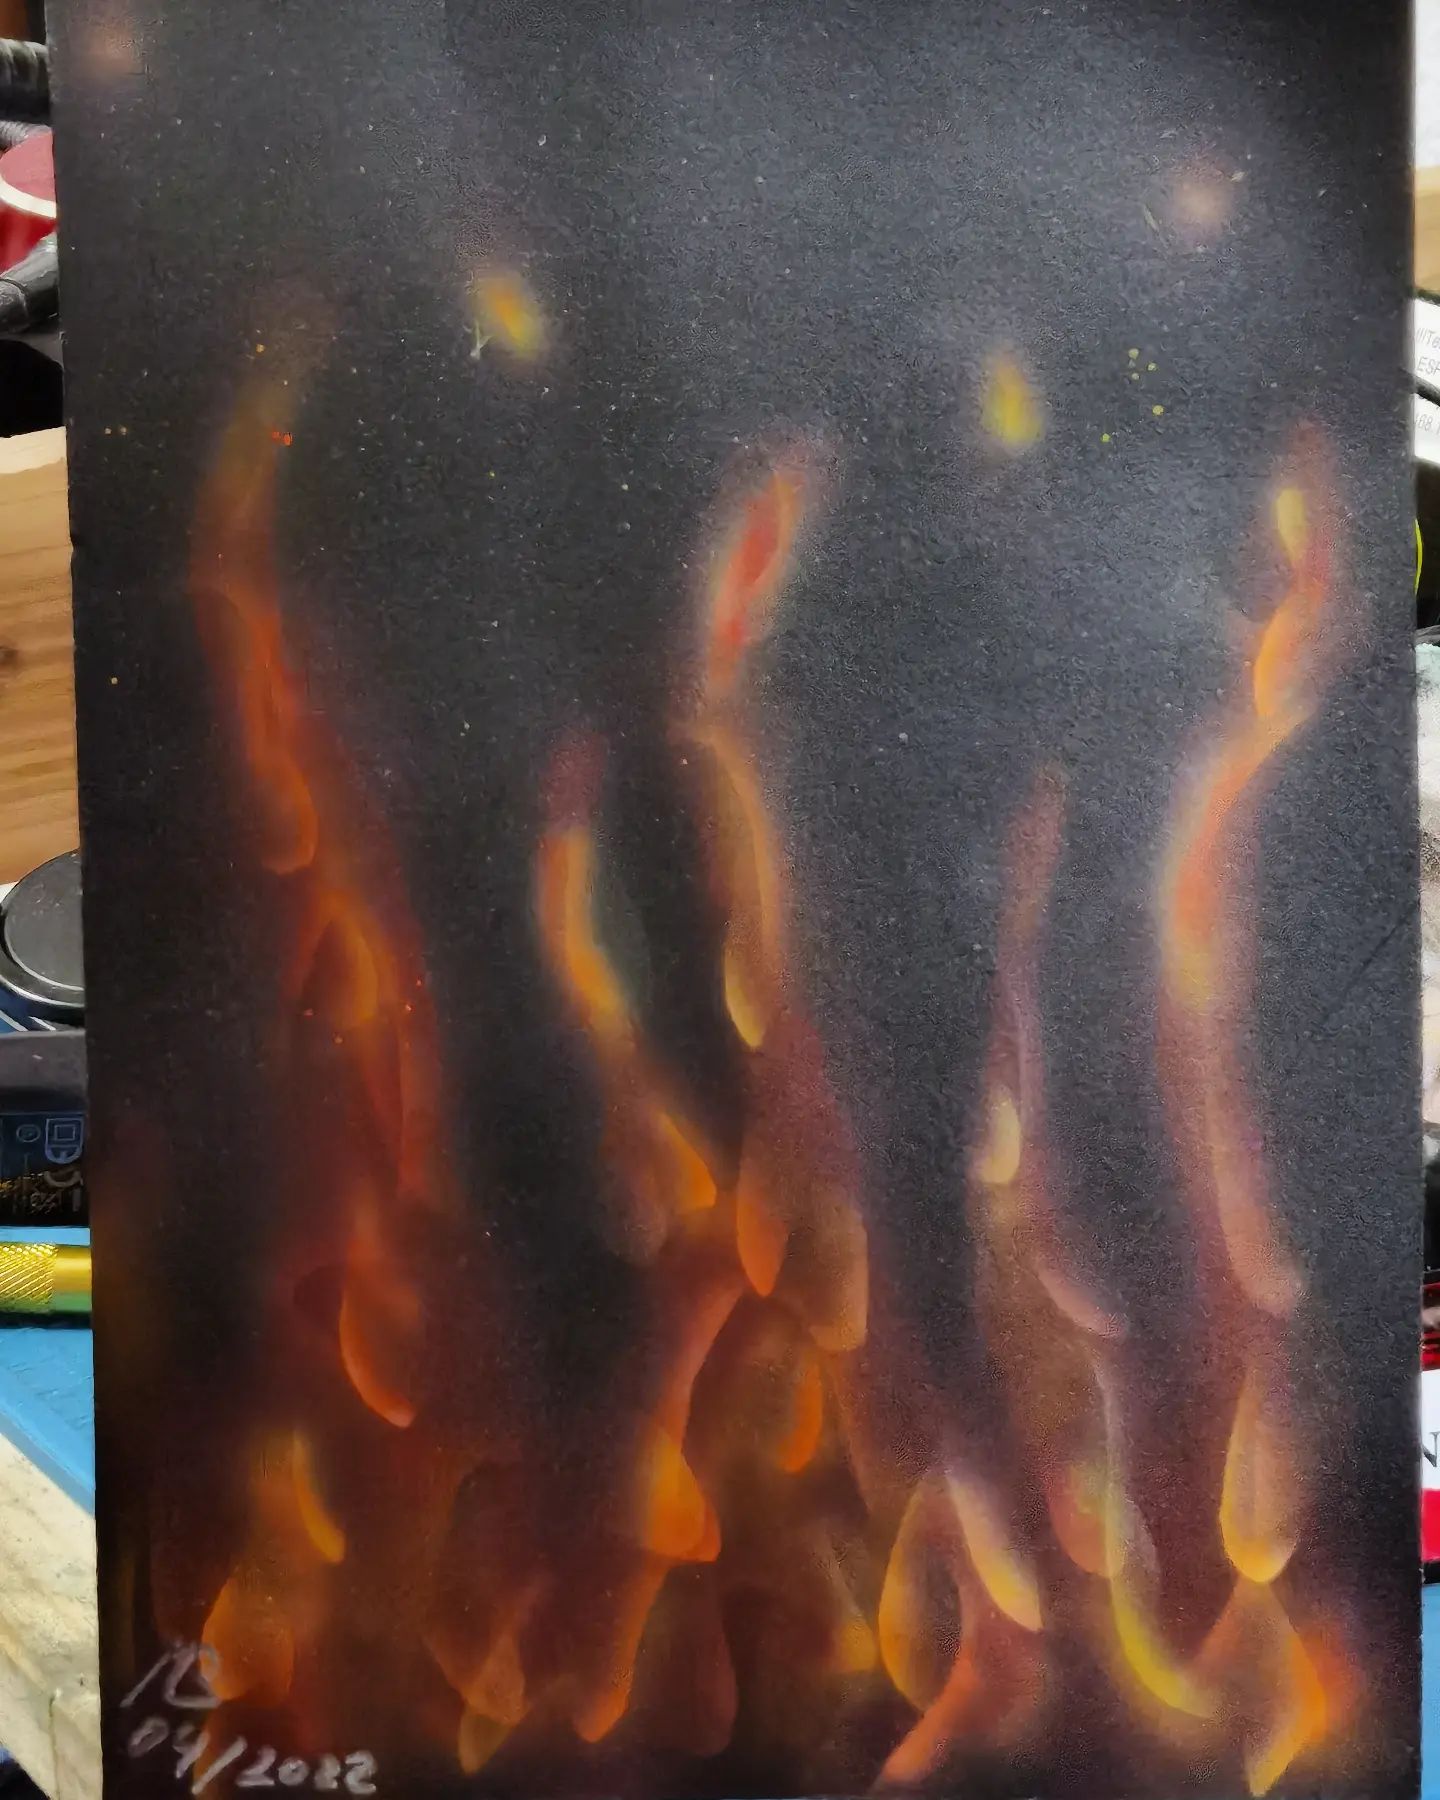 My first try to airbrush some flames. I think it is not so bad.  #art #airbrush #airbrushpainting #airbrushart #freehandairbrush #freehand #kunst #flammen #feuer #malen #freihand #diy #kreativ #airbrushing